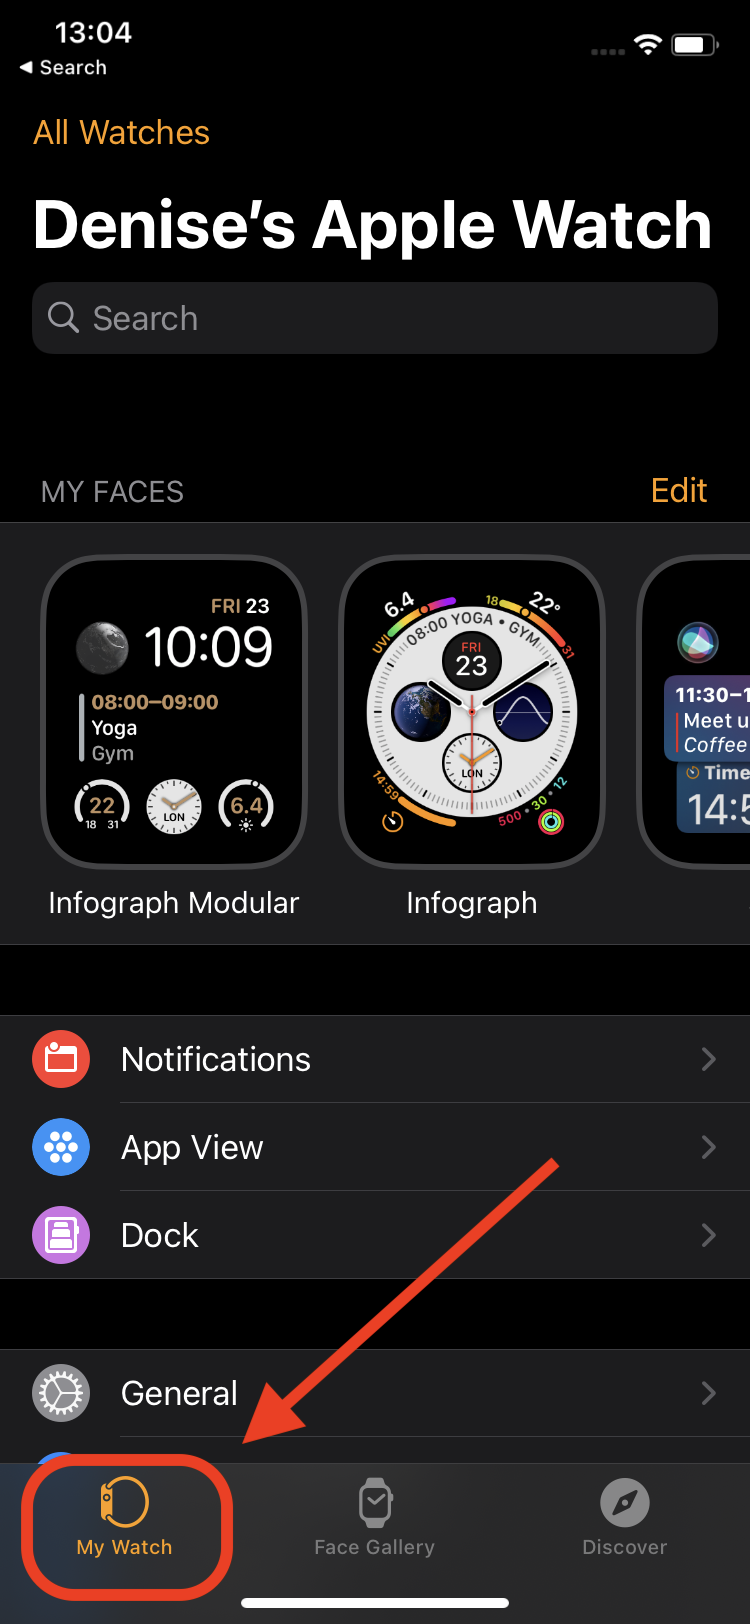 How to use Apple Pay on Apple Watch - tap My Watch